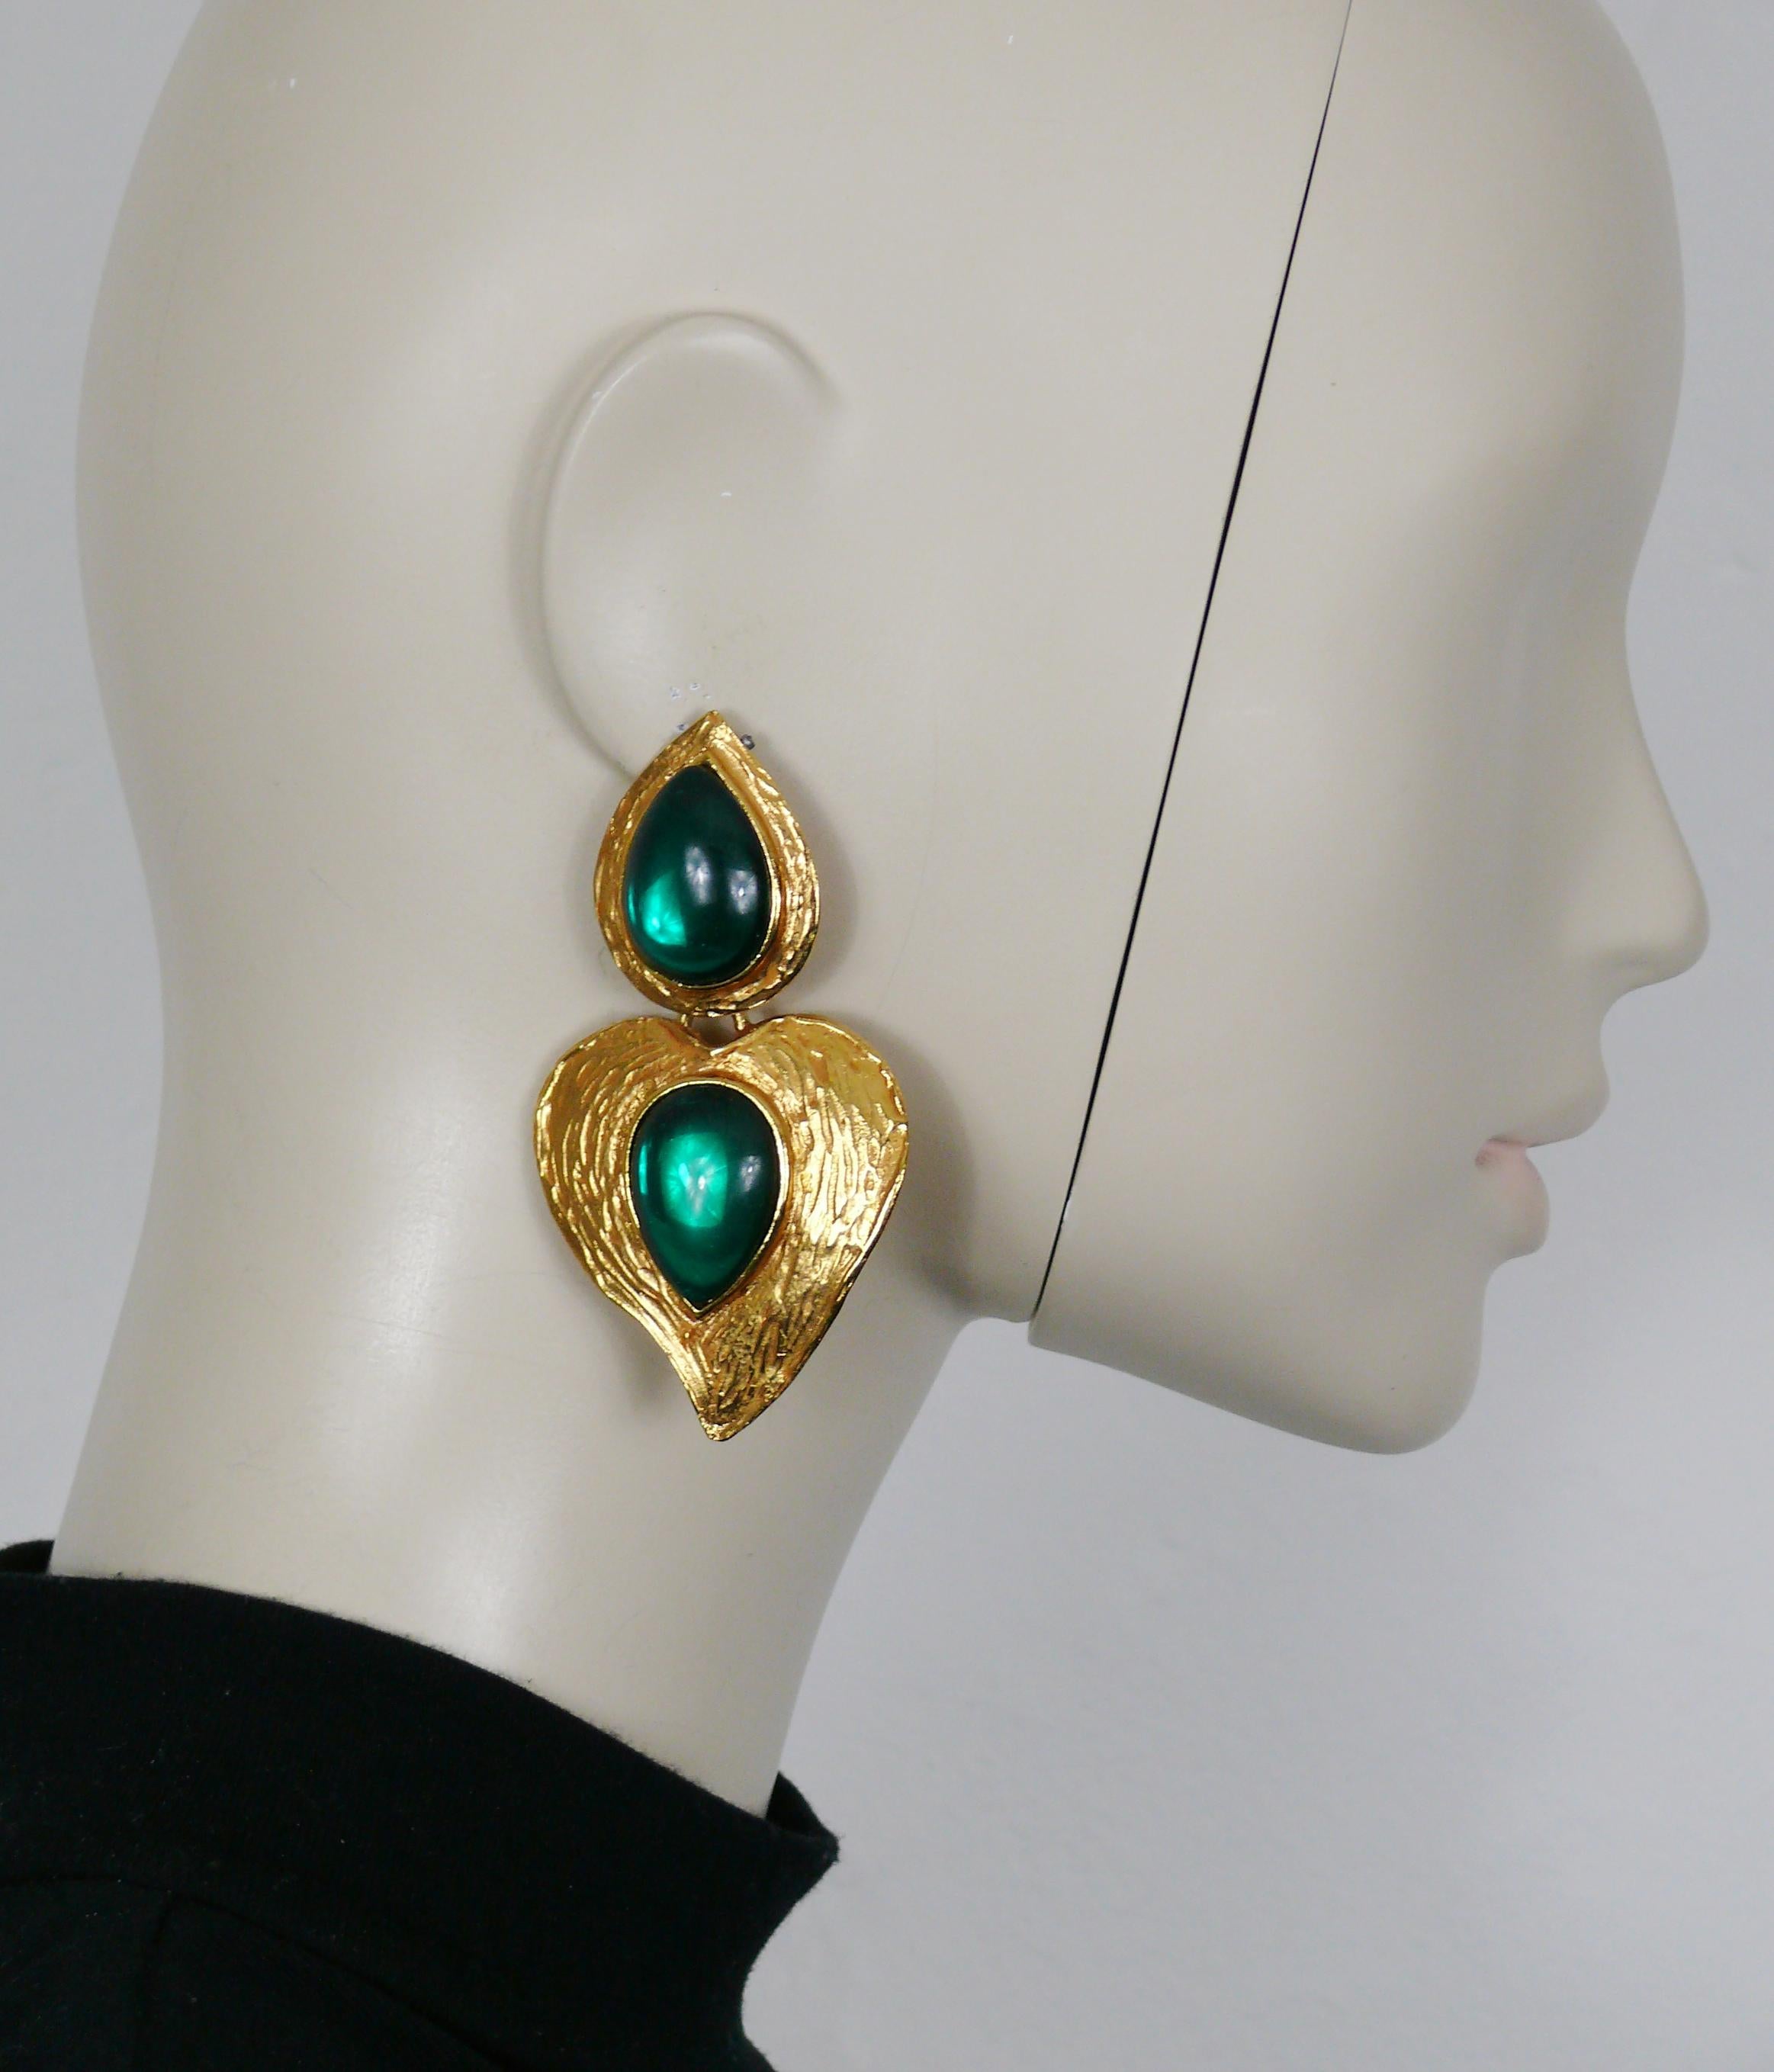 YVES SAINT LAURENT vintage textured gold tone heart dangling earrings (clip-on) featuring two emerald green glass cabochons. 

Embossed YSL.

Indicative measurements : height approx. 8.2 cm (3.23 inches) / max. width approx. 4.6 cm (1.81